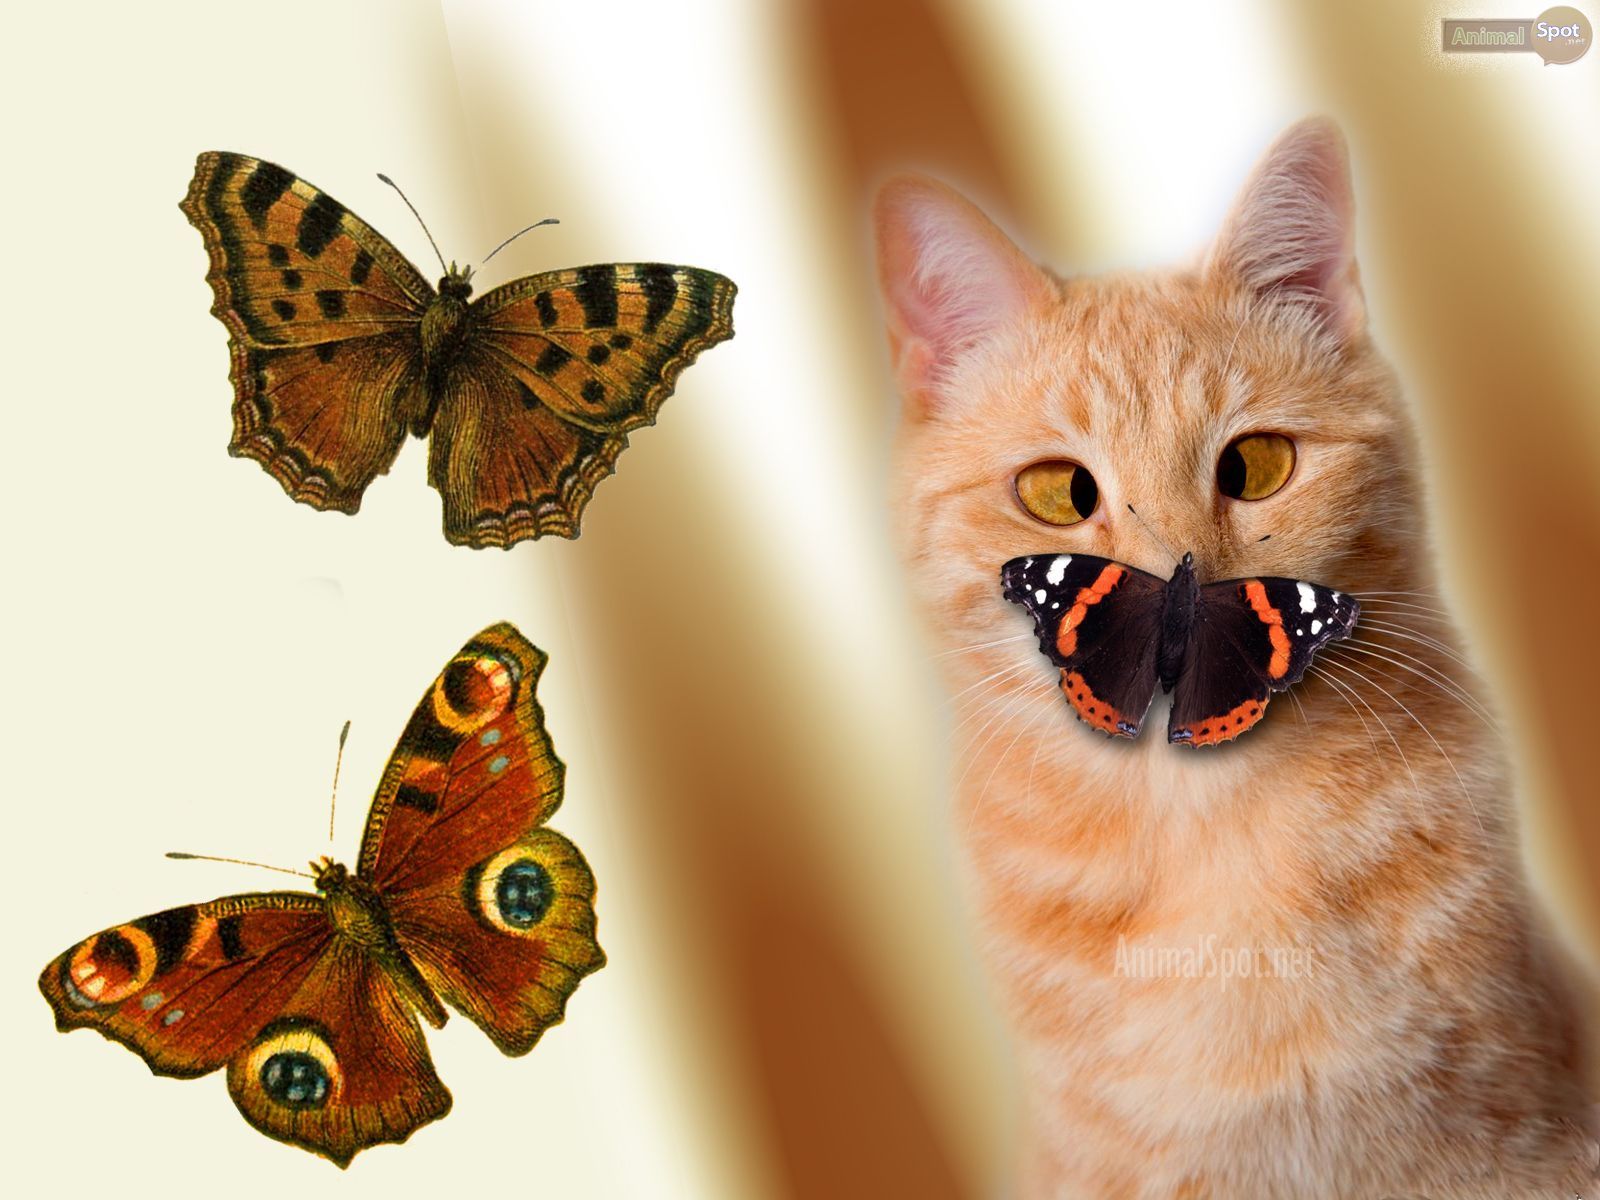 Butterfly Wallpapers « Animal Spot